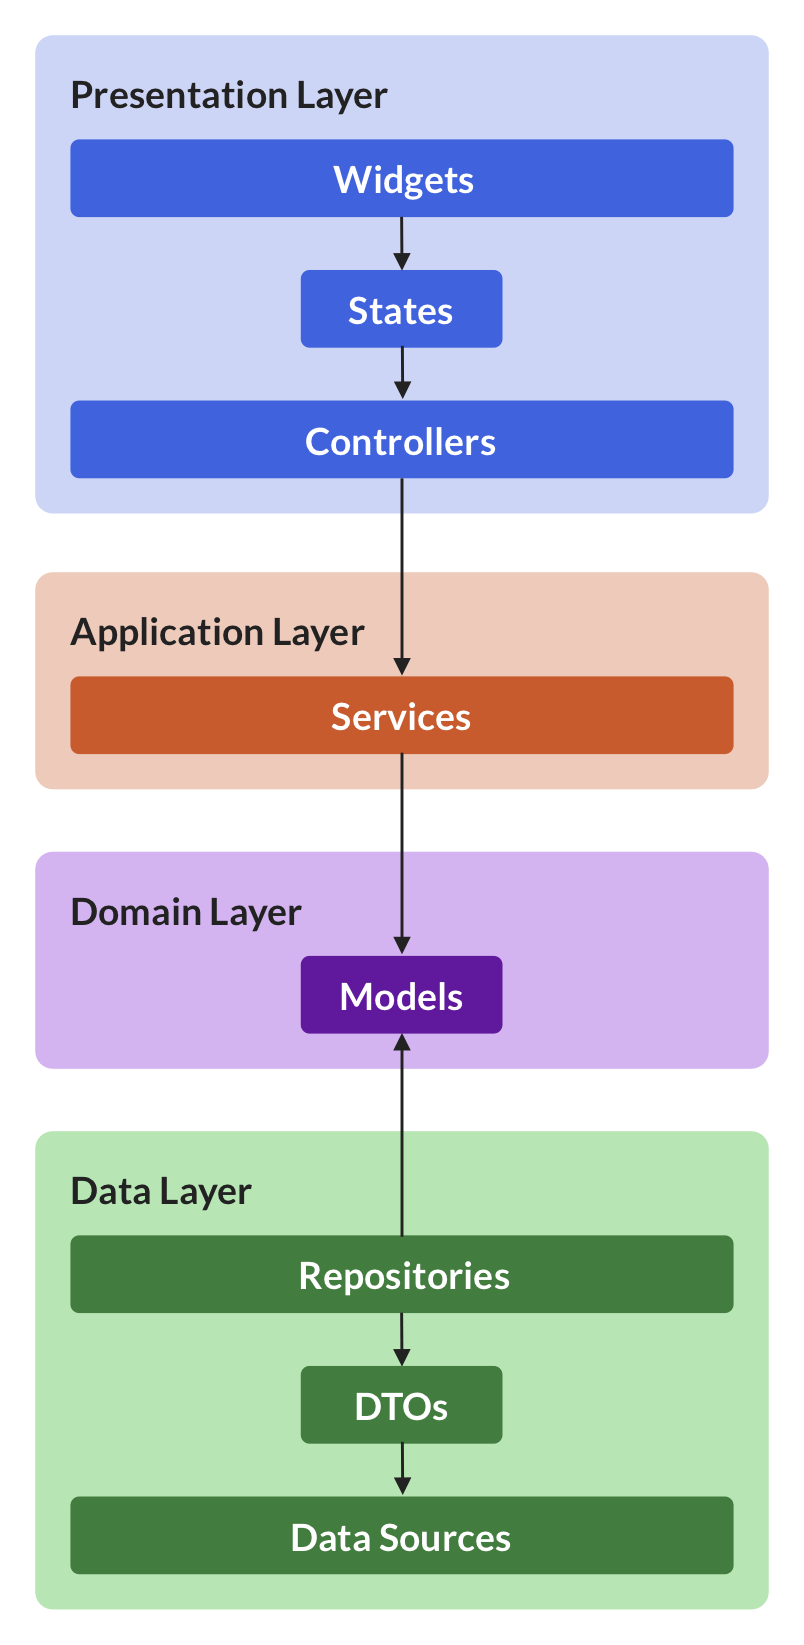 Flutter App Architecture using data, domain, application, and presentation layers.